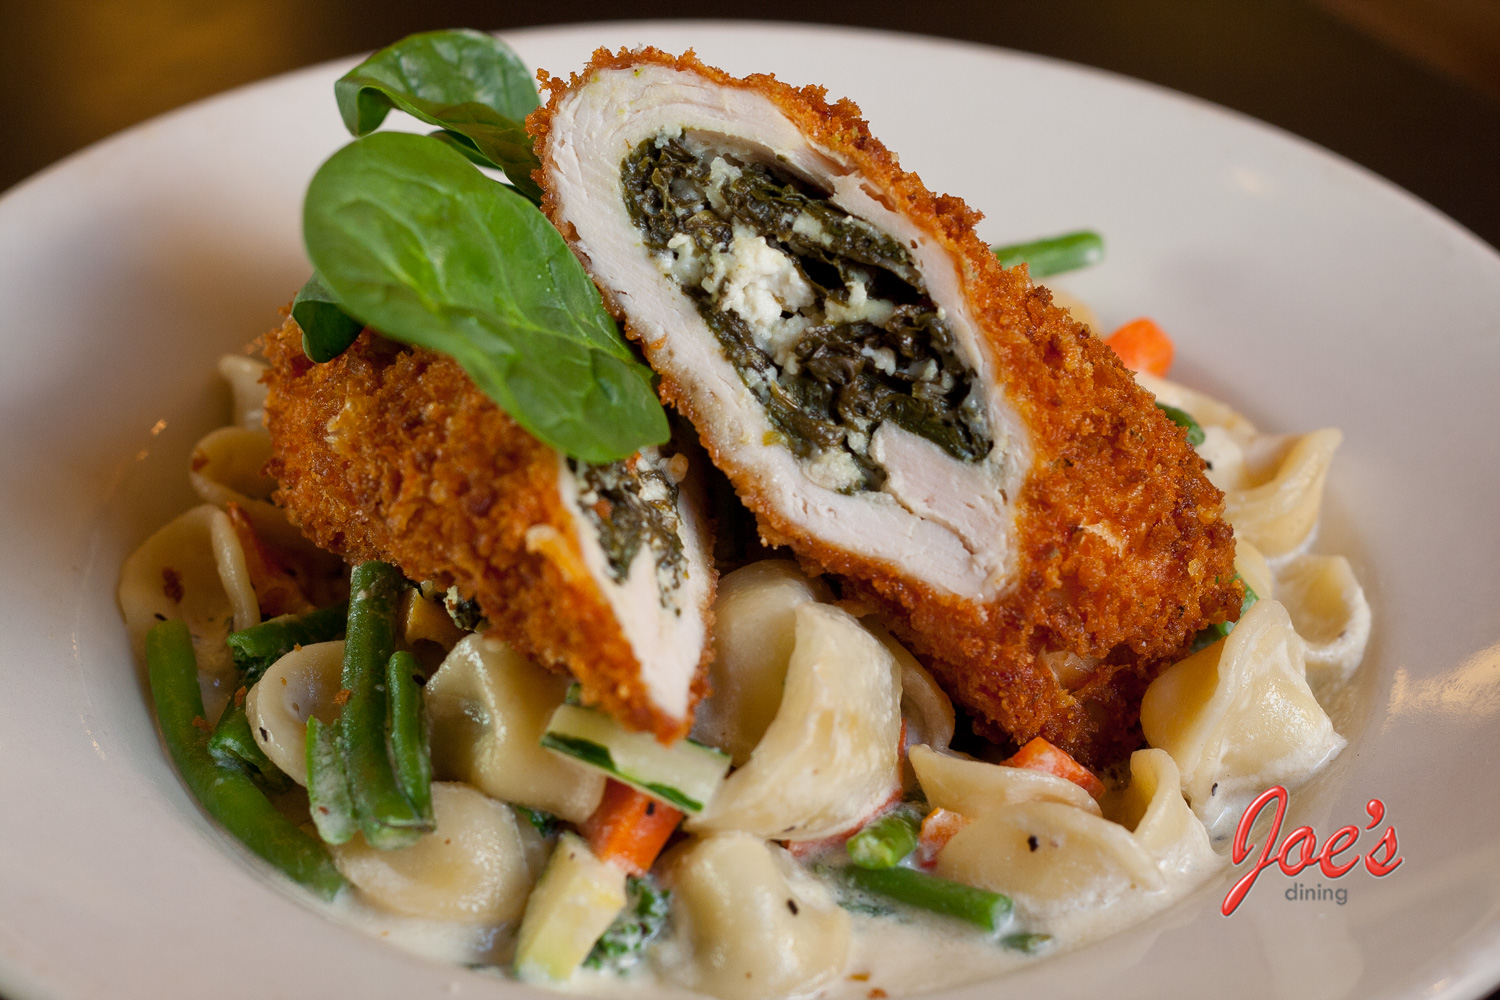 Panko crusted filled chicken breast